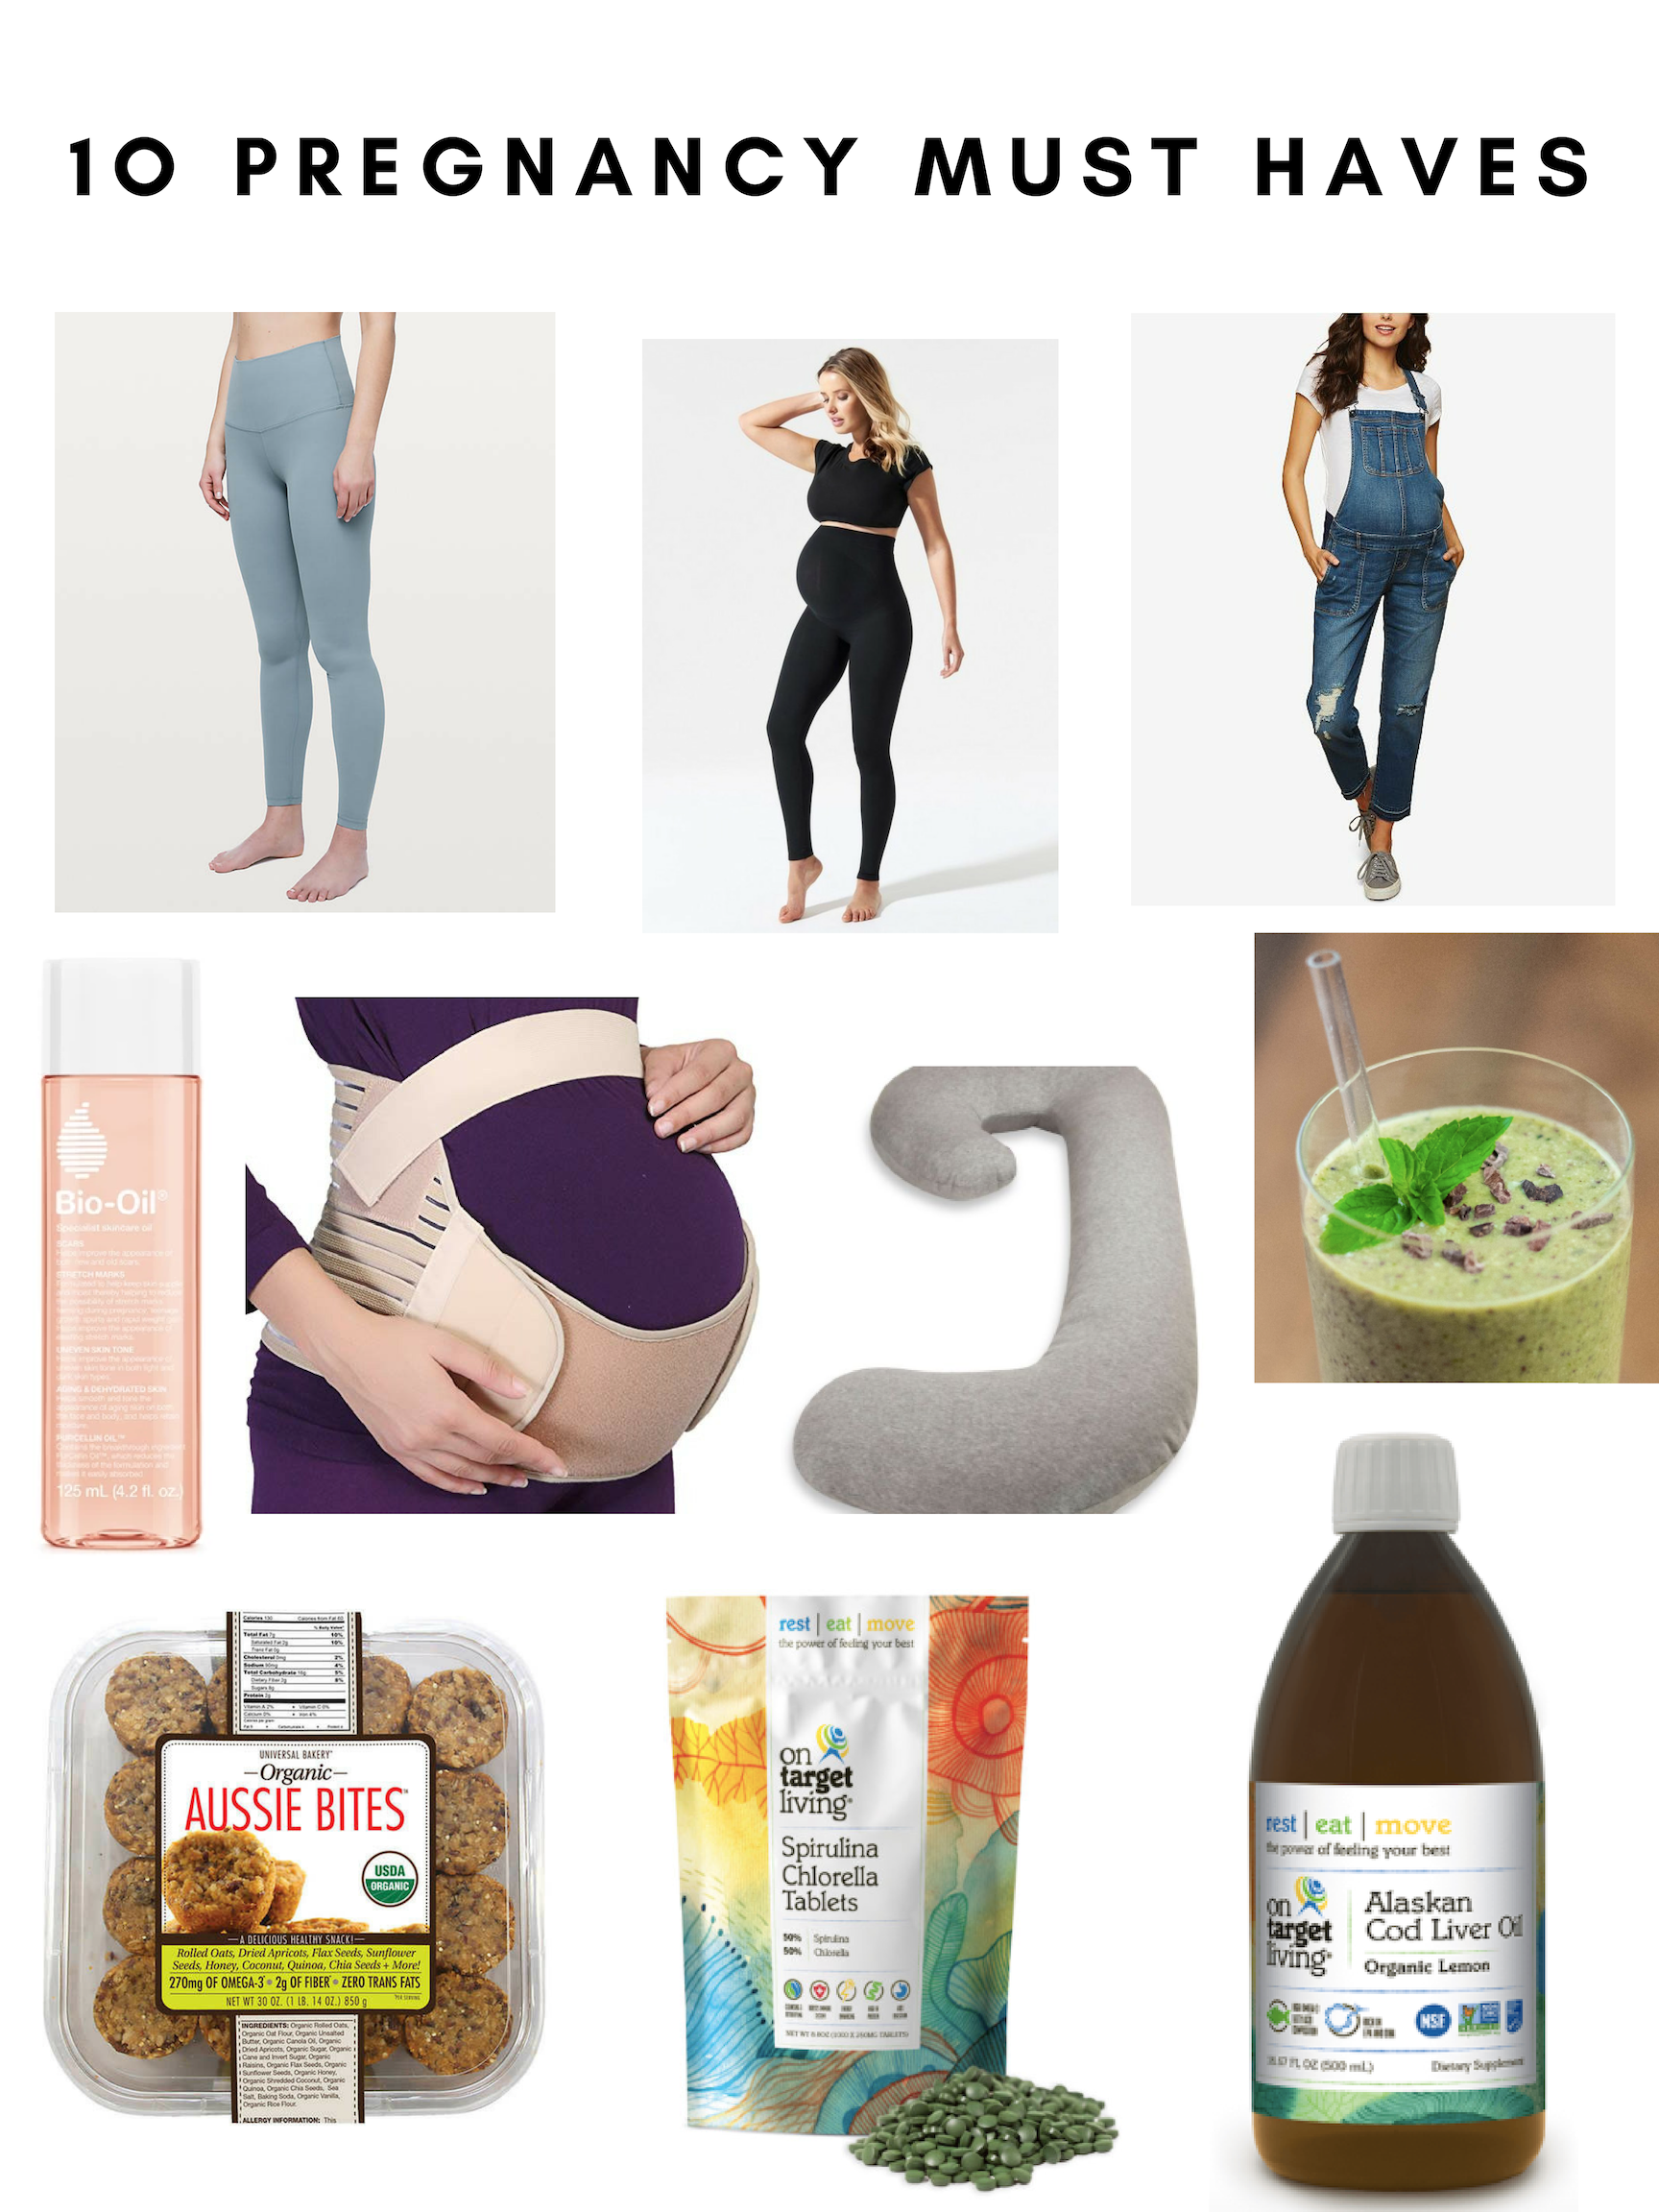 Our Natural Life: My Top 11 Pregnancy Essentials 